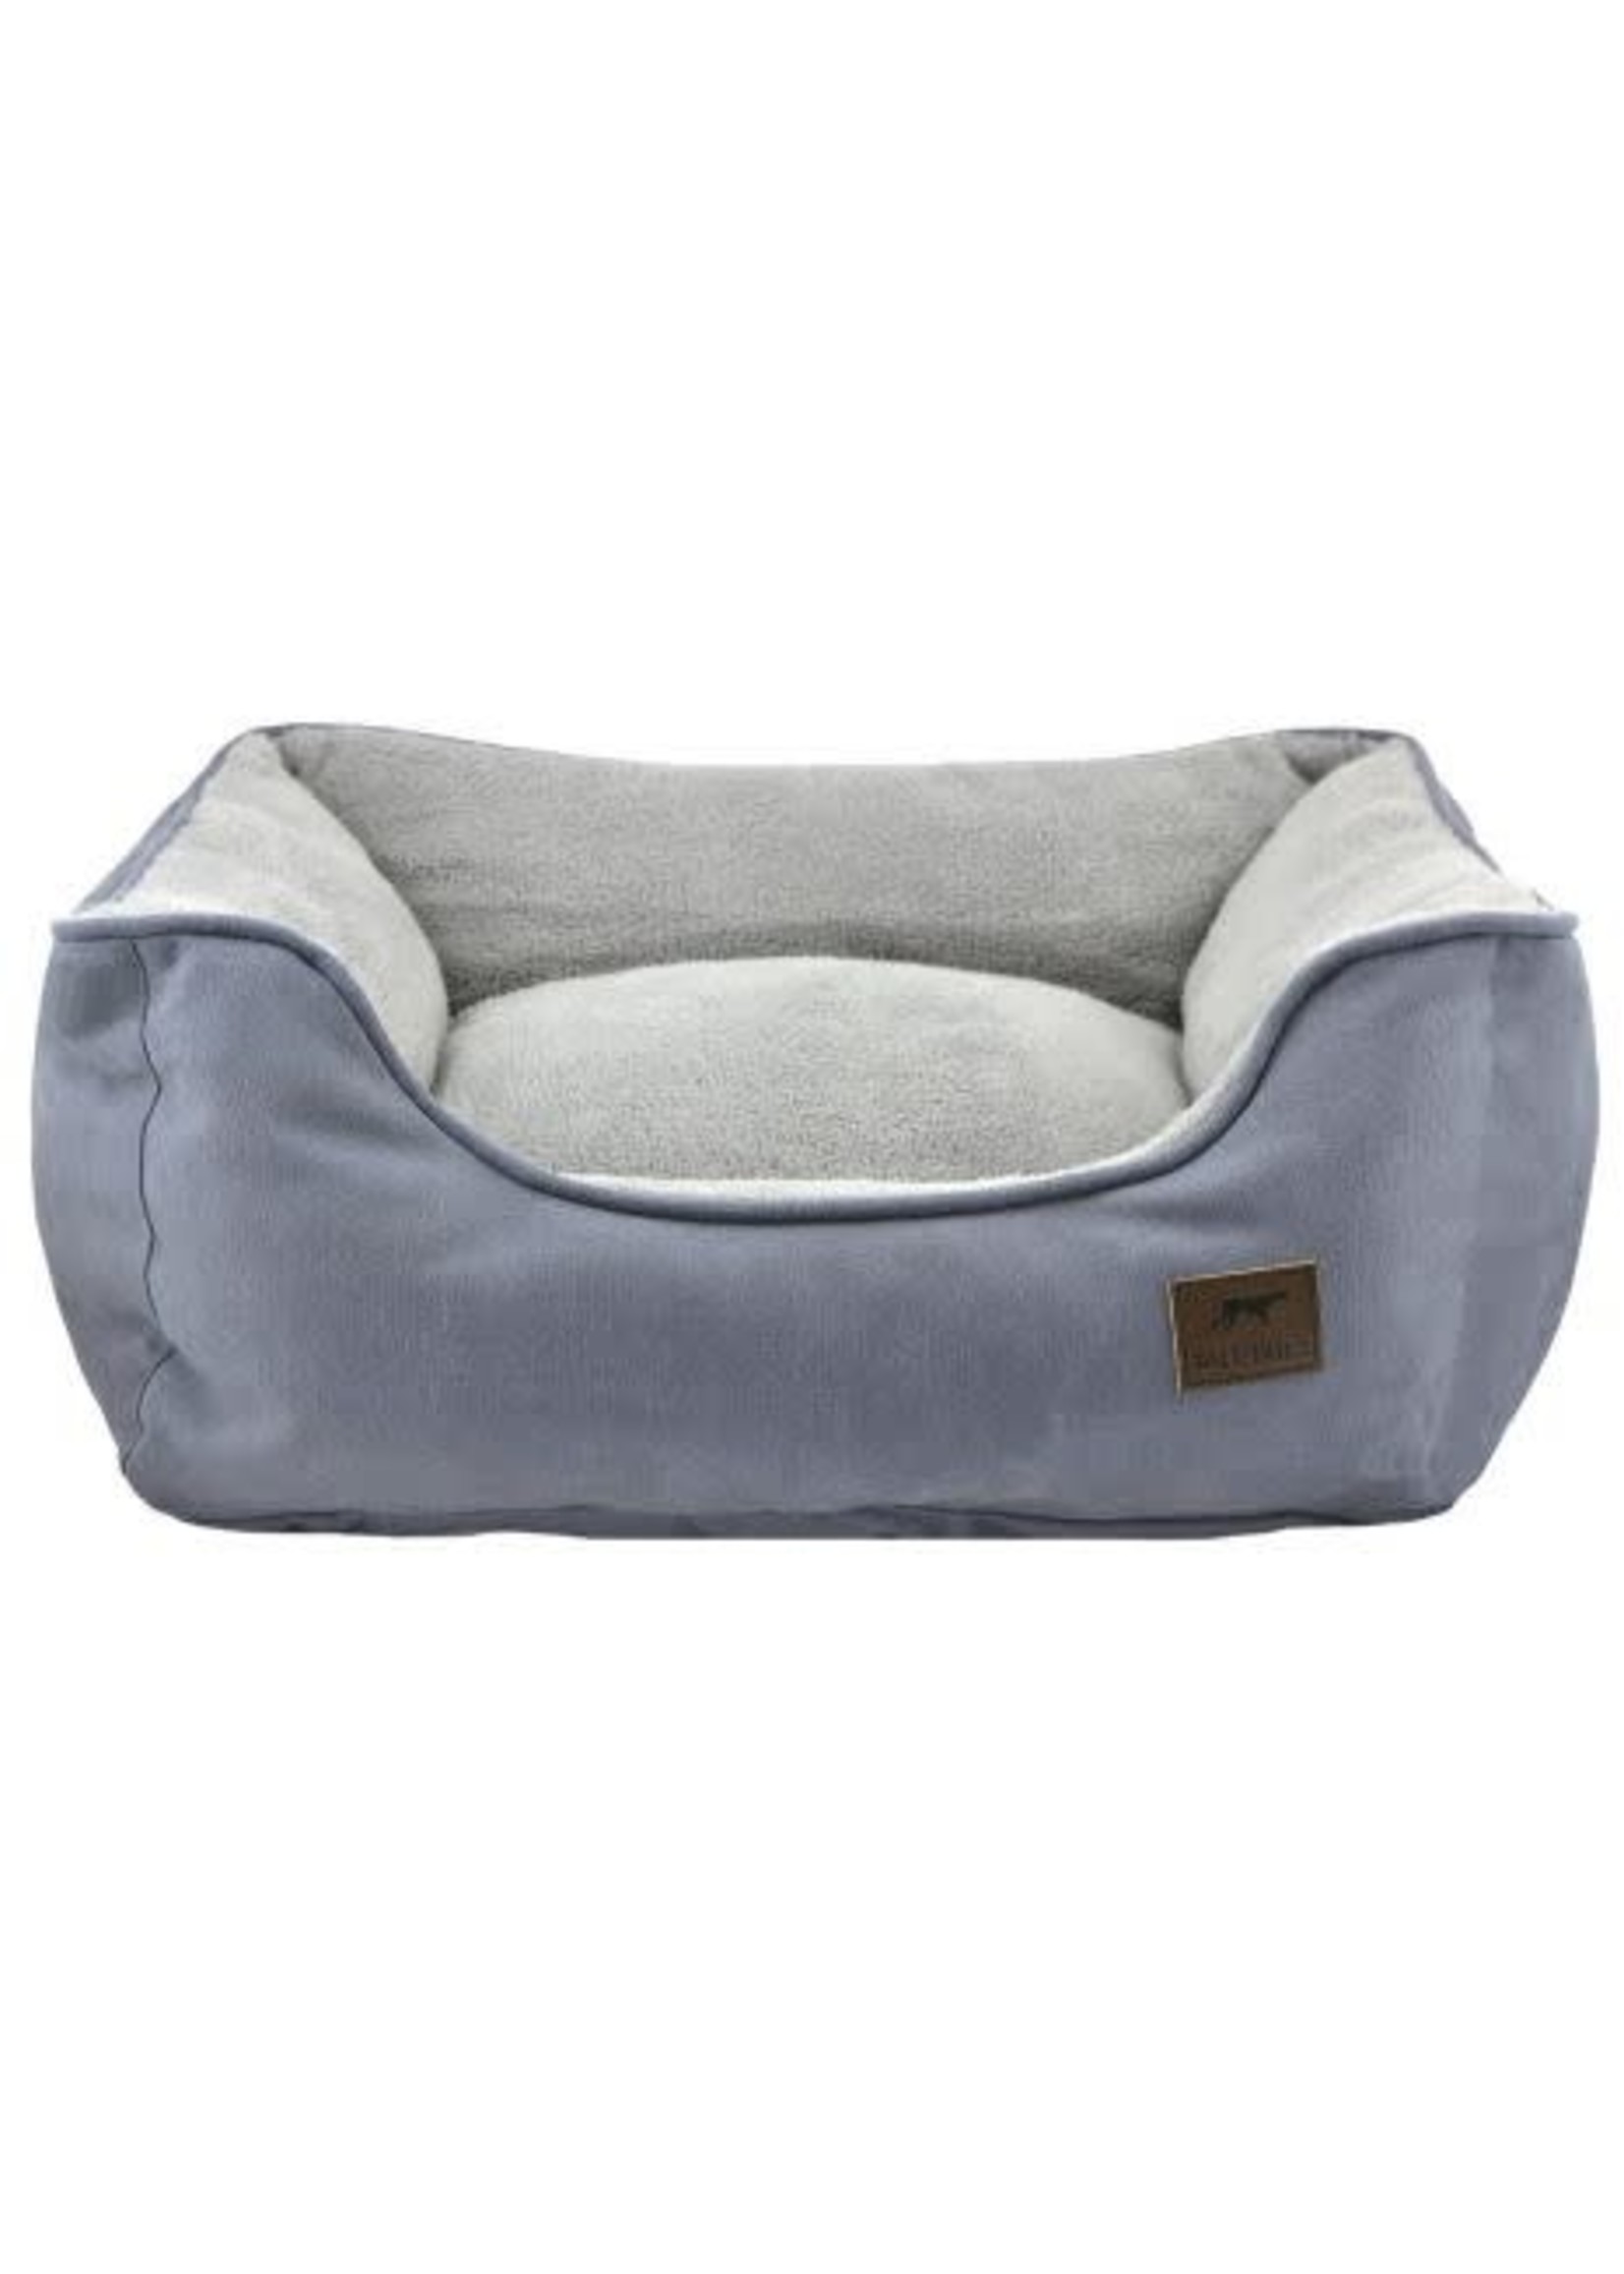 Tall Tails Tall Tails Bolster Bed Charcoal Large